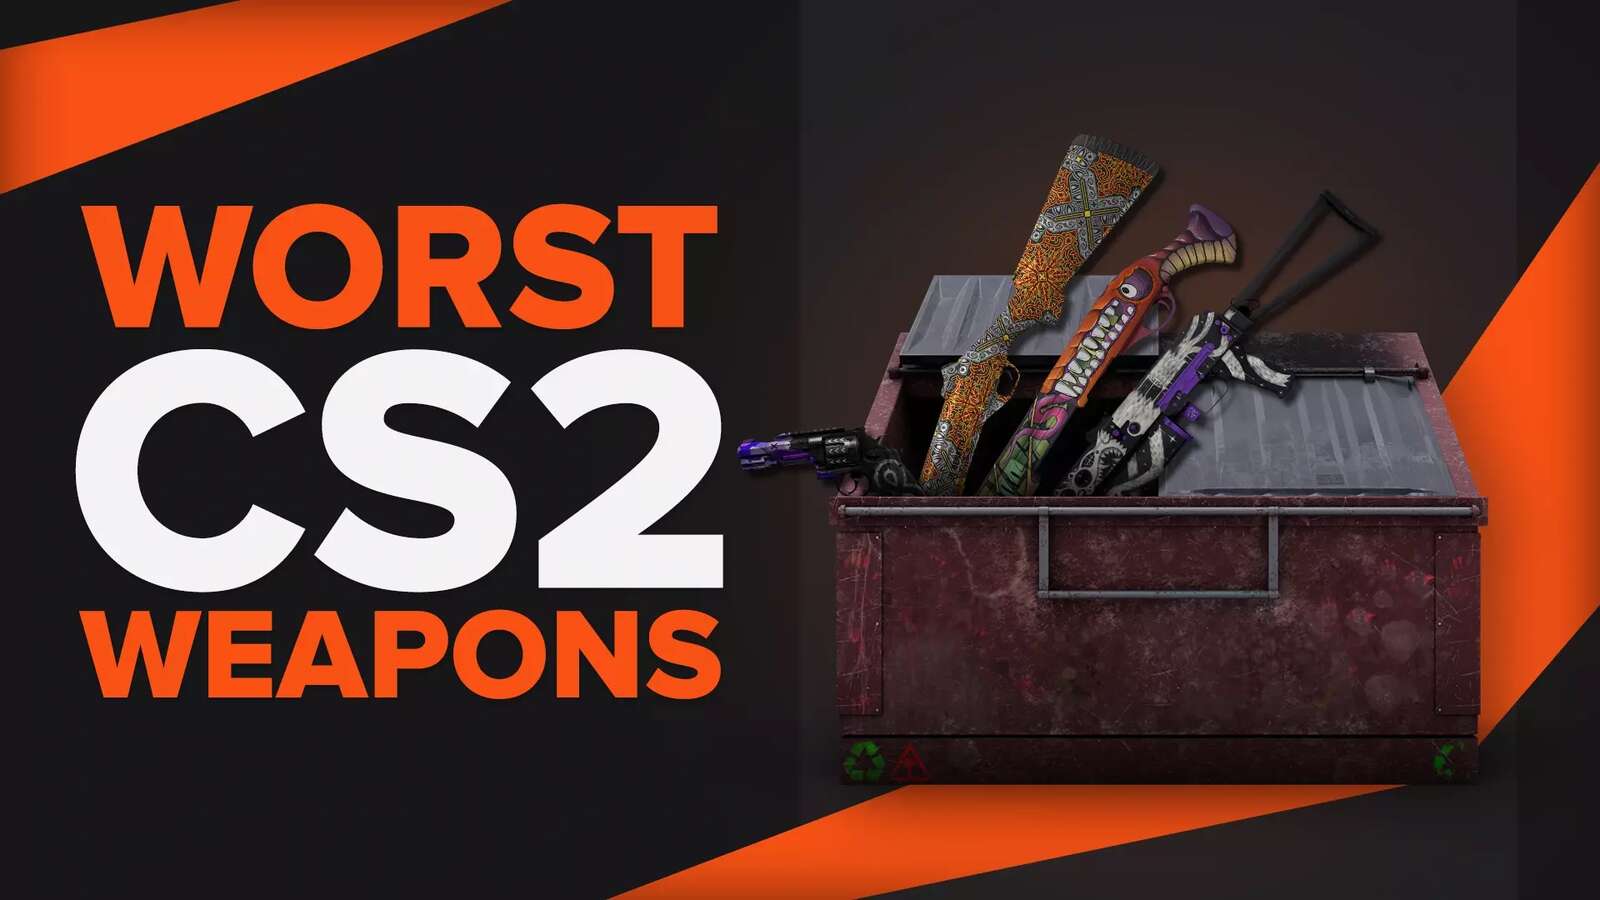 7 Worst Weapons CS2 (CSGO) Has To Offer [Ranked]